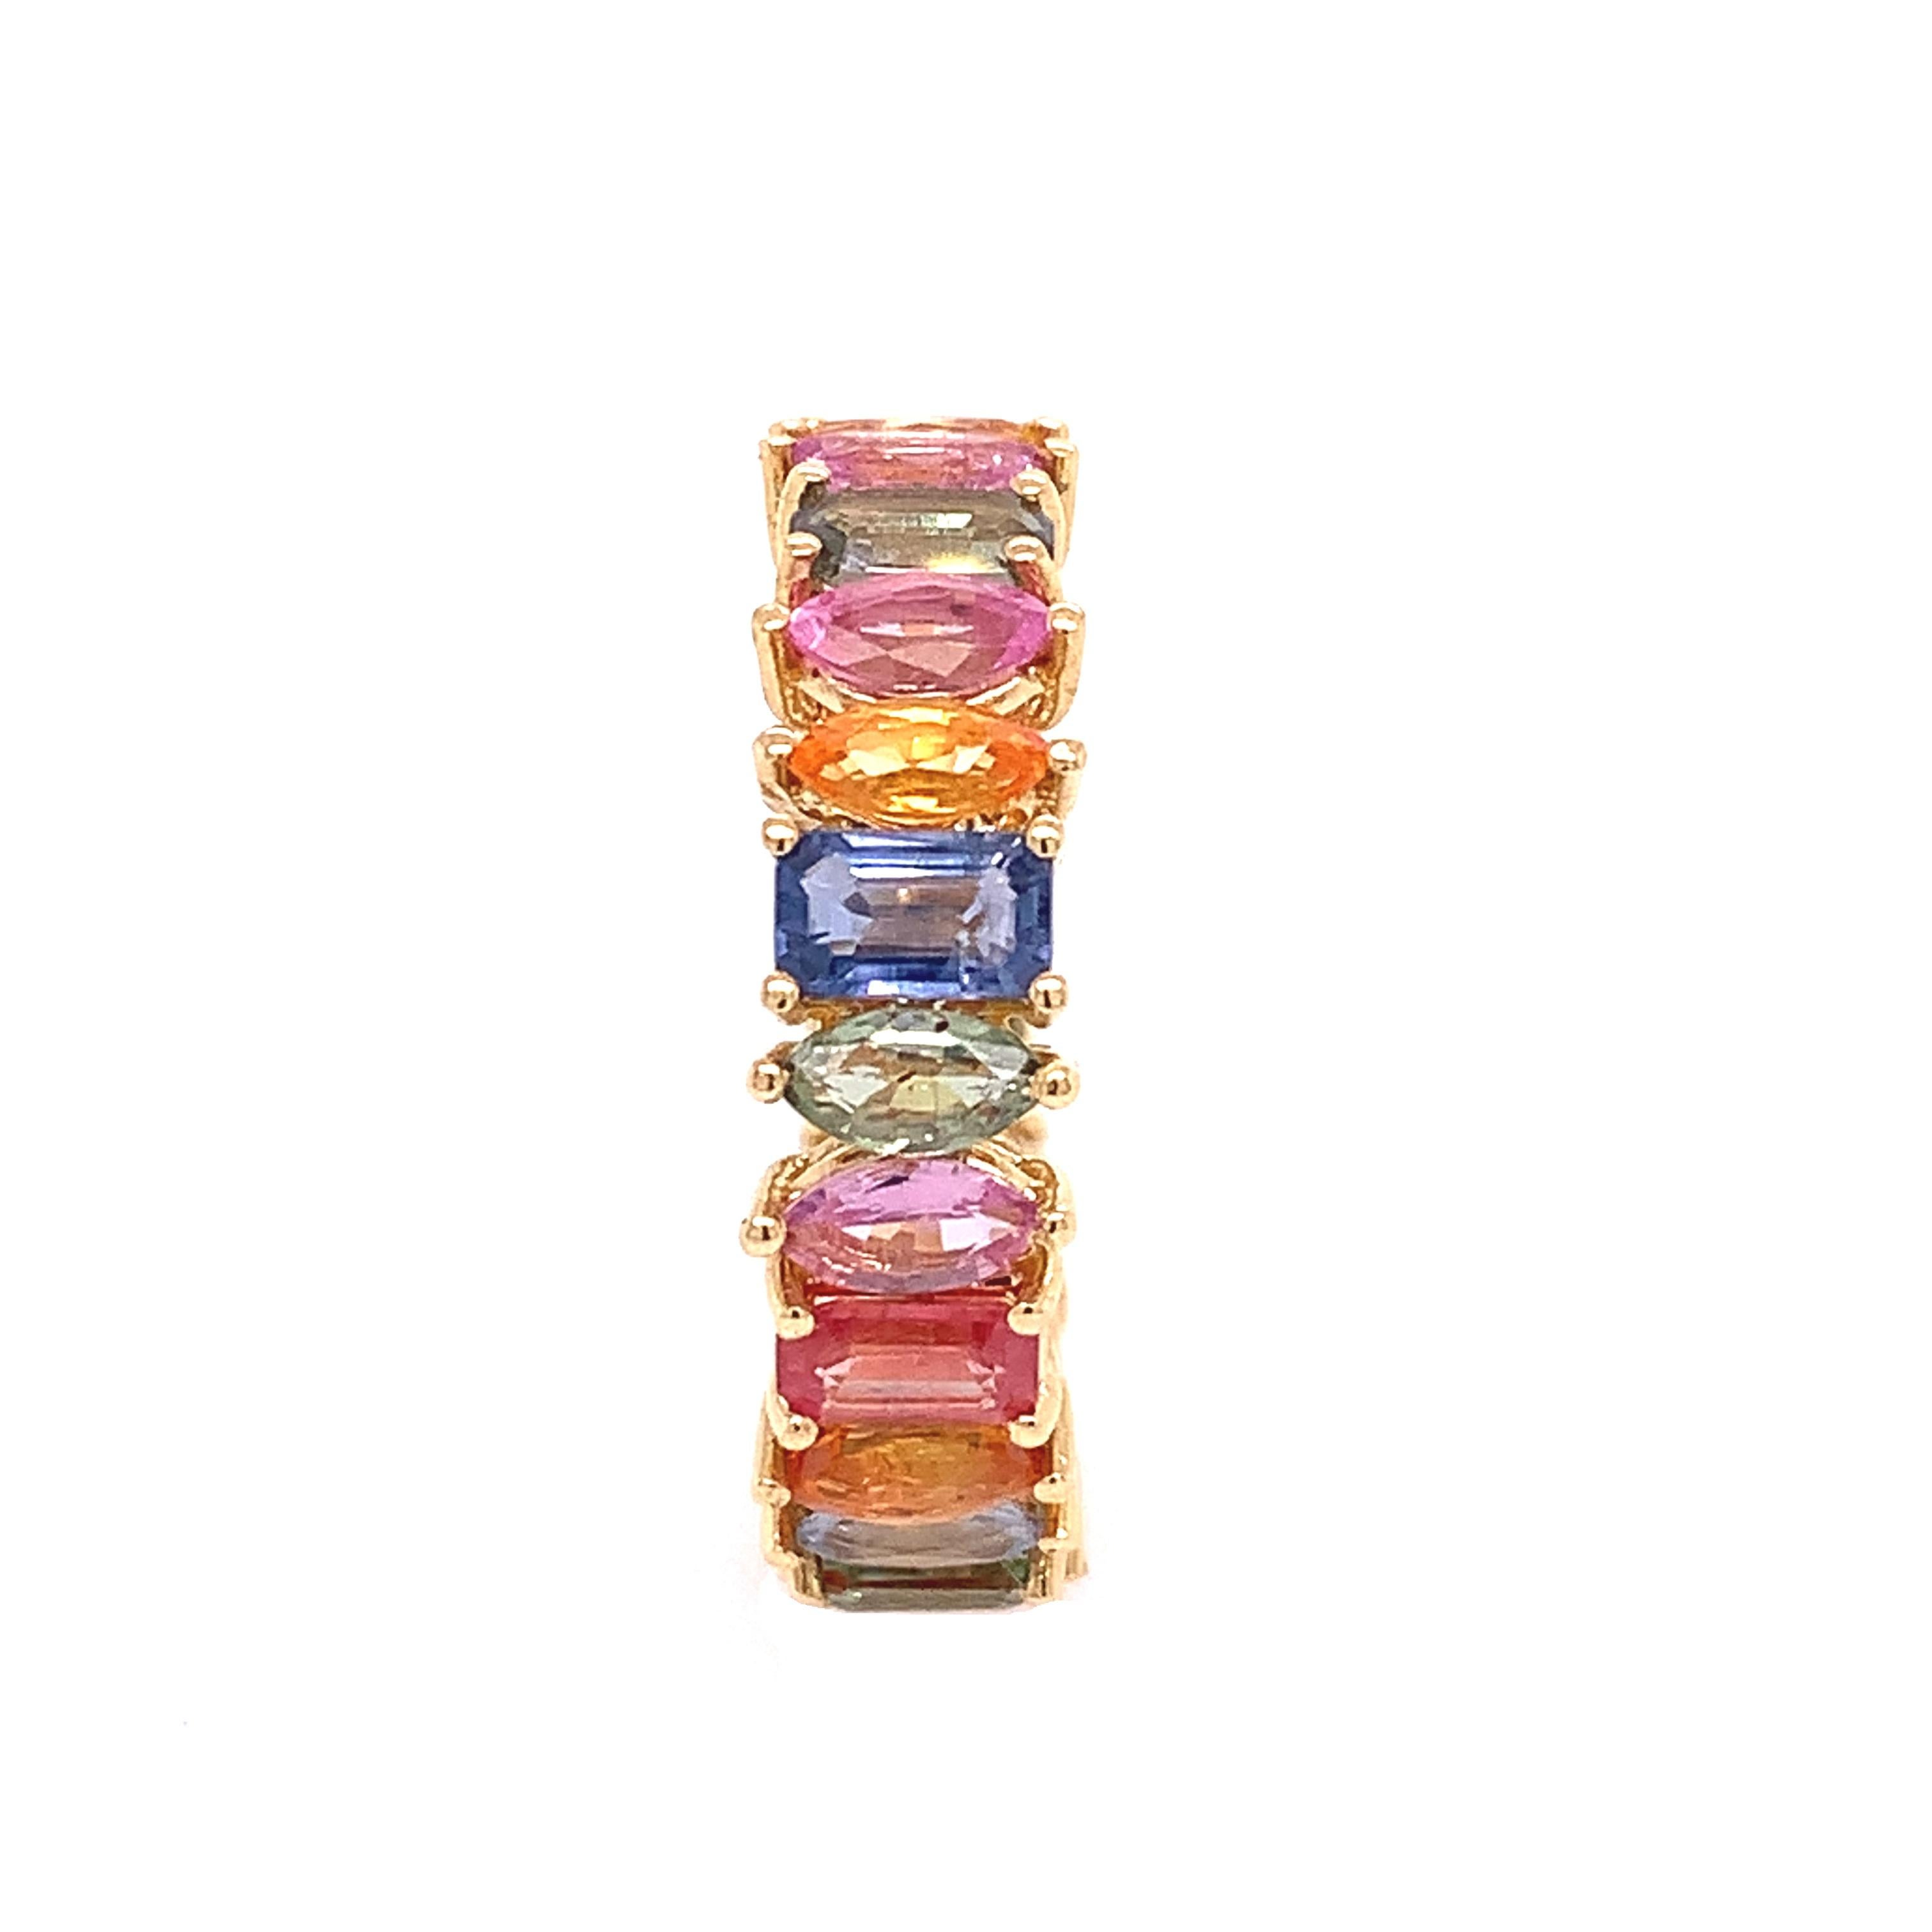 18K Yellow Gold
Multicolor Sapphire: 24 stones - 5.84ct Total weight.